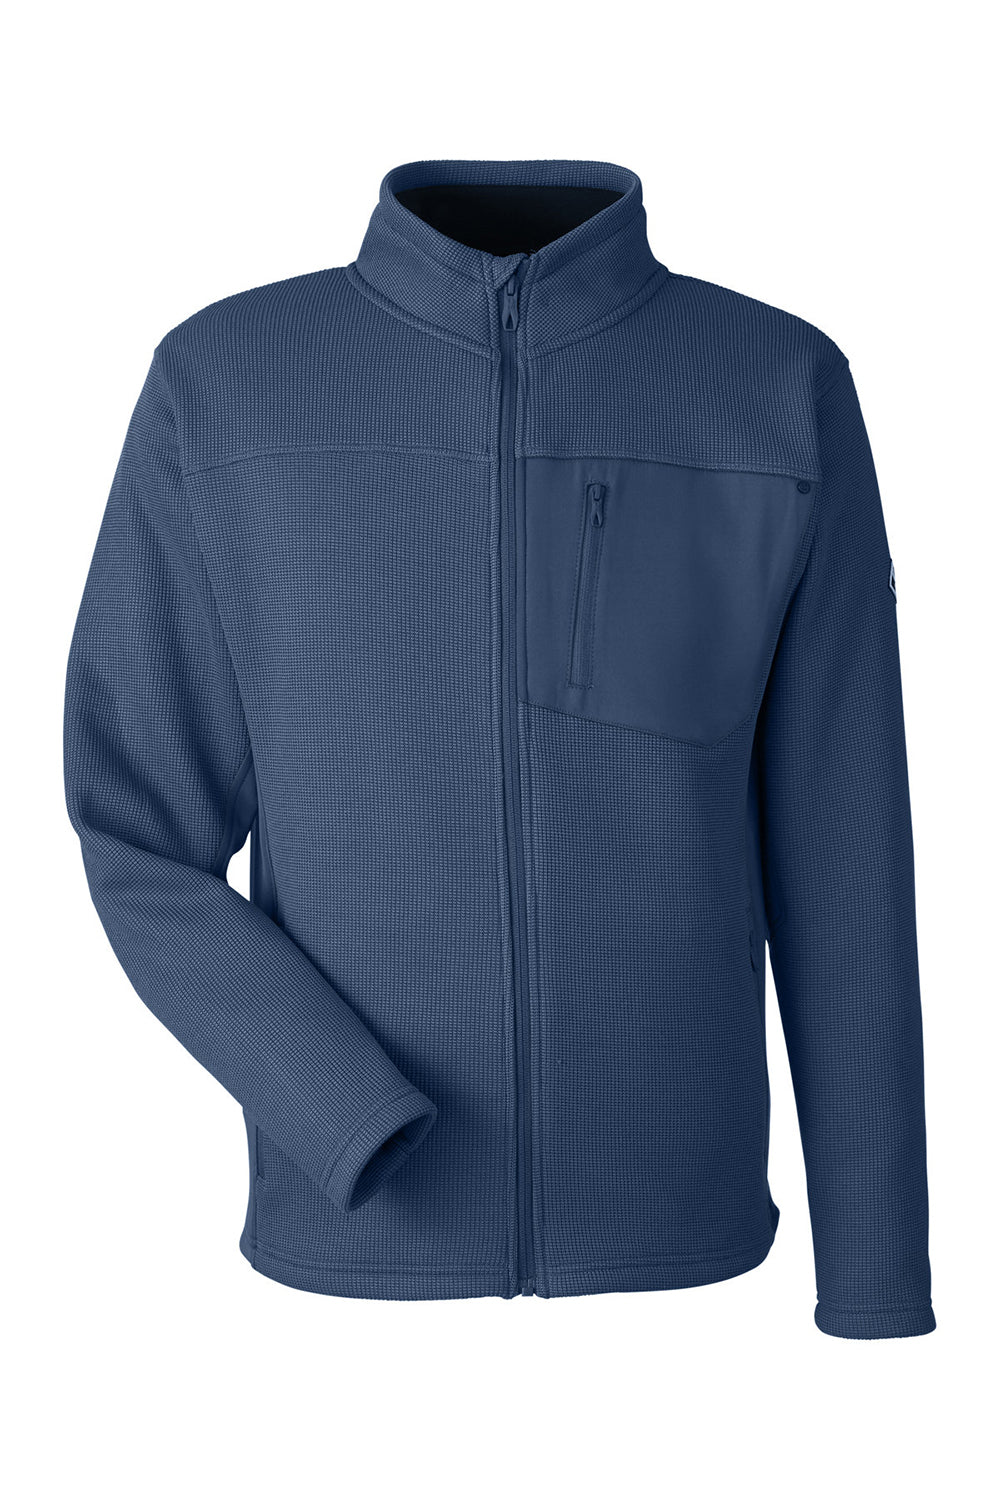 Spyder S17936 Mens Constant Canyon Full Zip Sweater Jacket Frontier Blue Flat Front